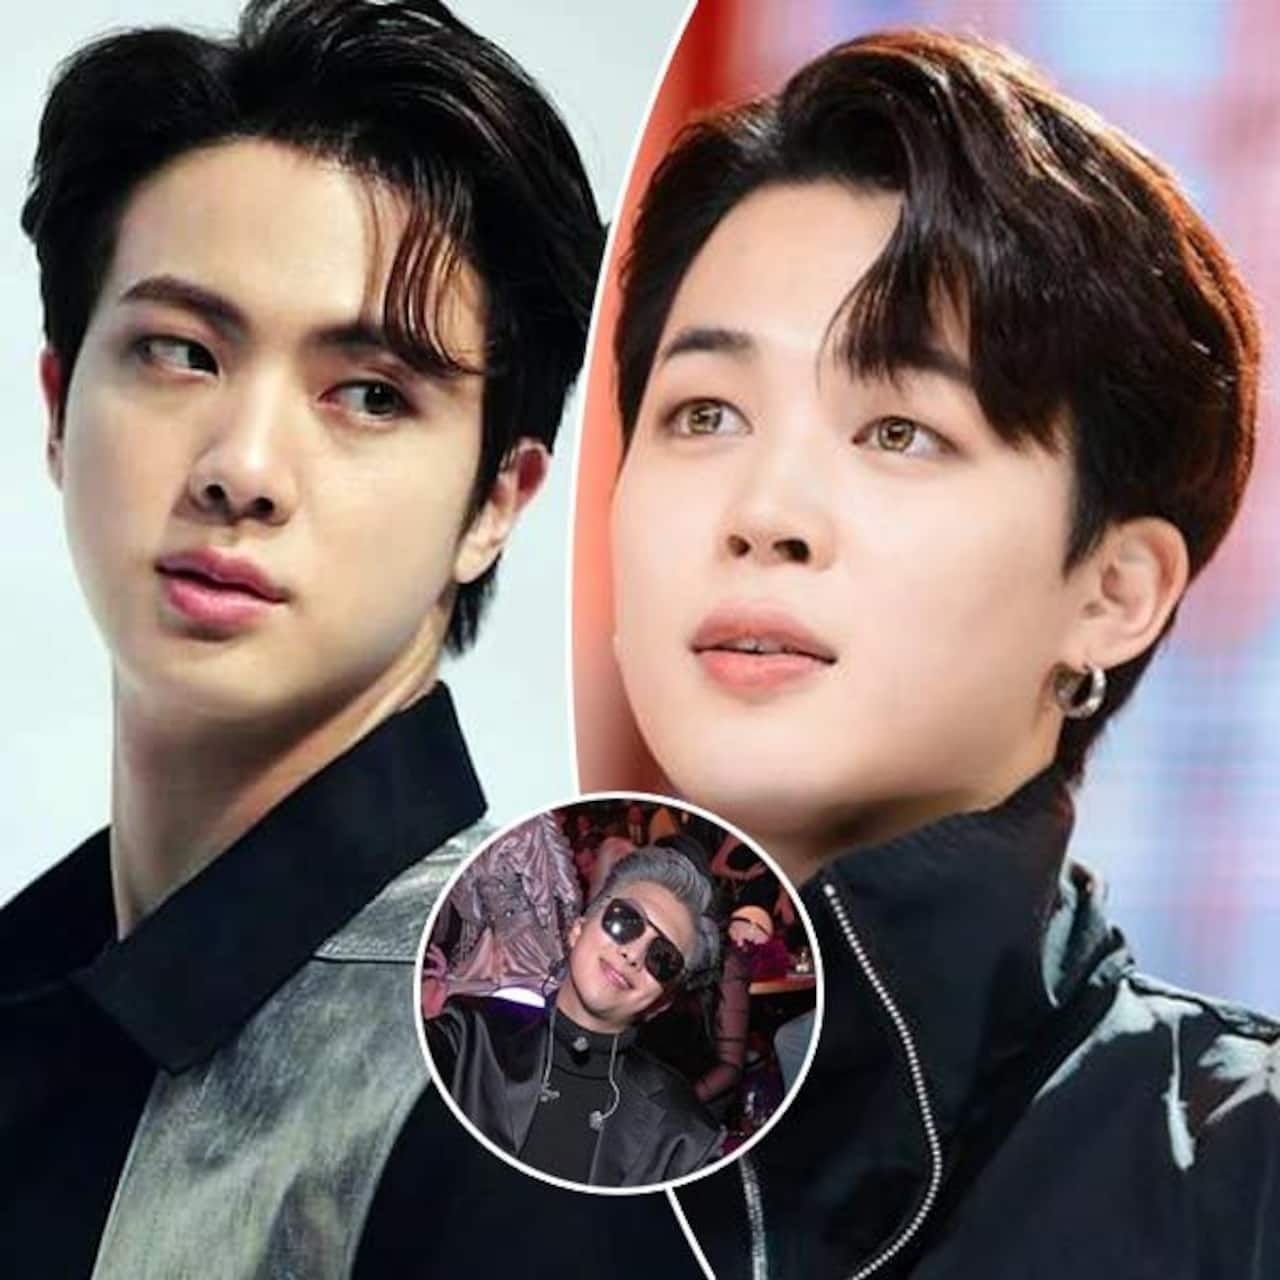 Jin- Jimin echo ARMYs' sentiment, gush over RM's mafia boss look from the Grammys 2022